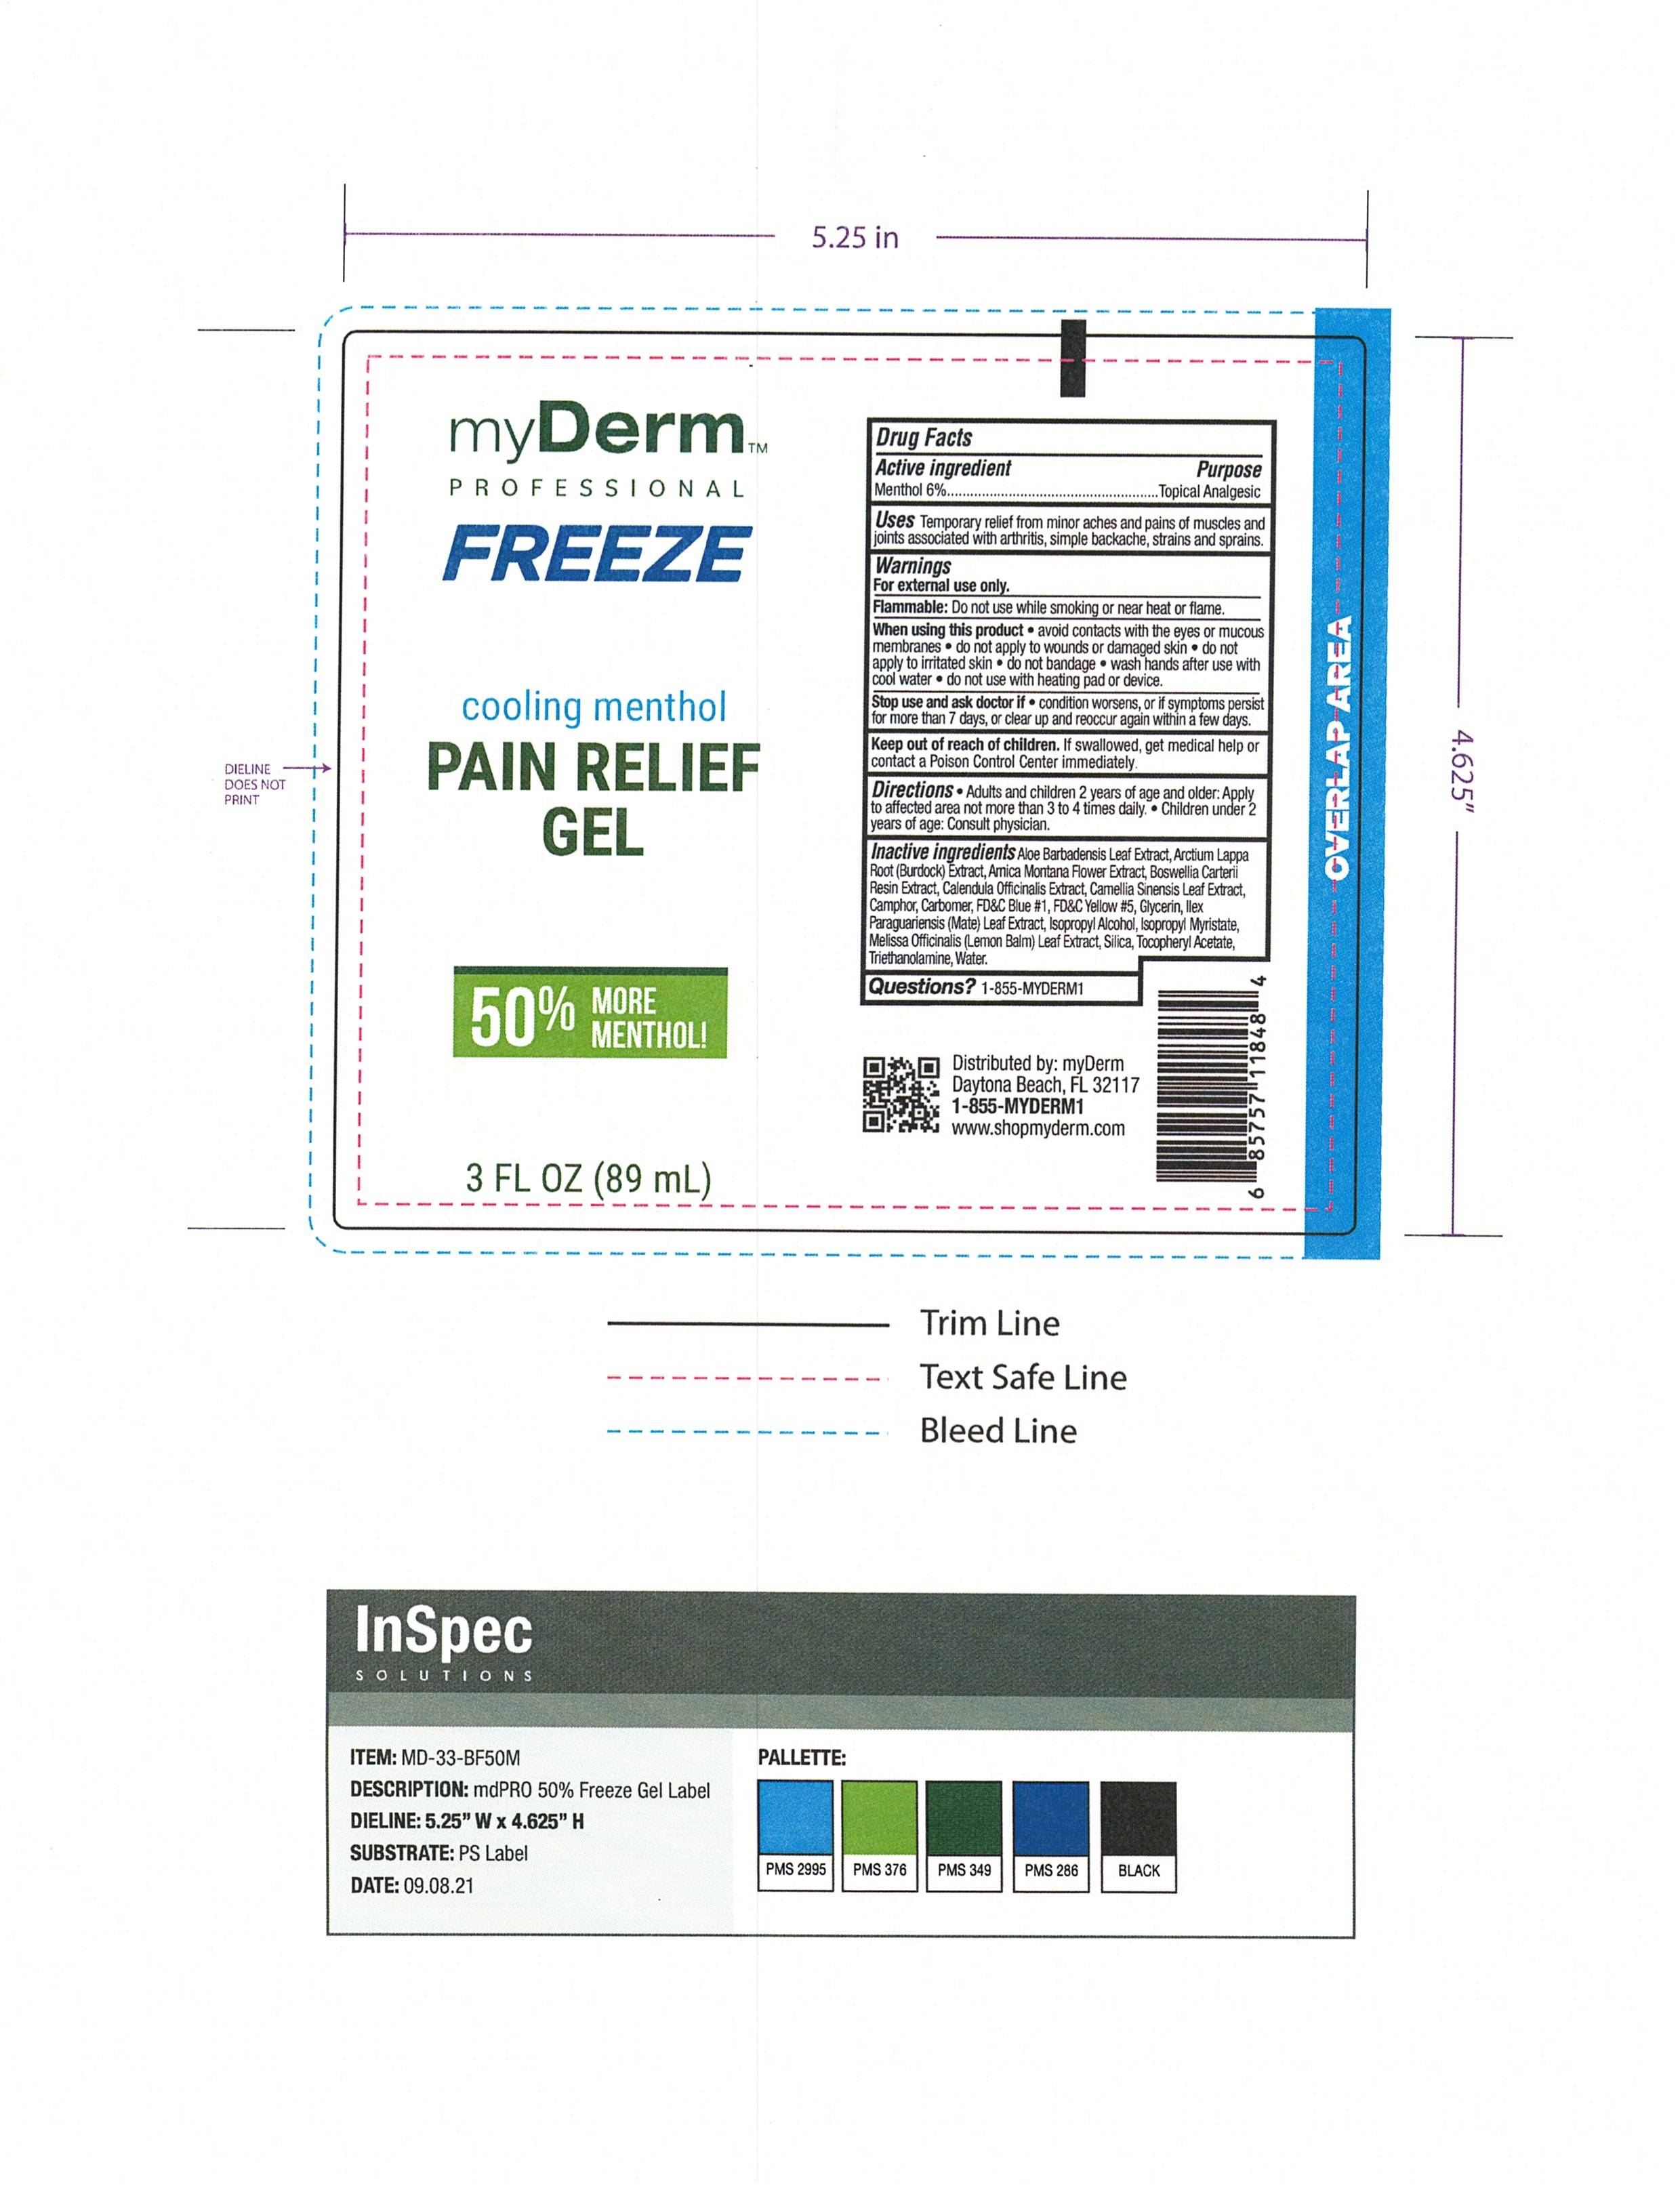 myDerm Cooling Menthol Pain Relief Gel with 50% More Menthol